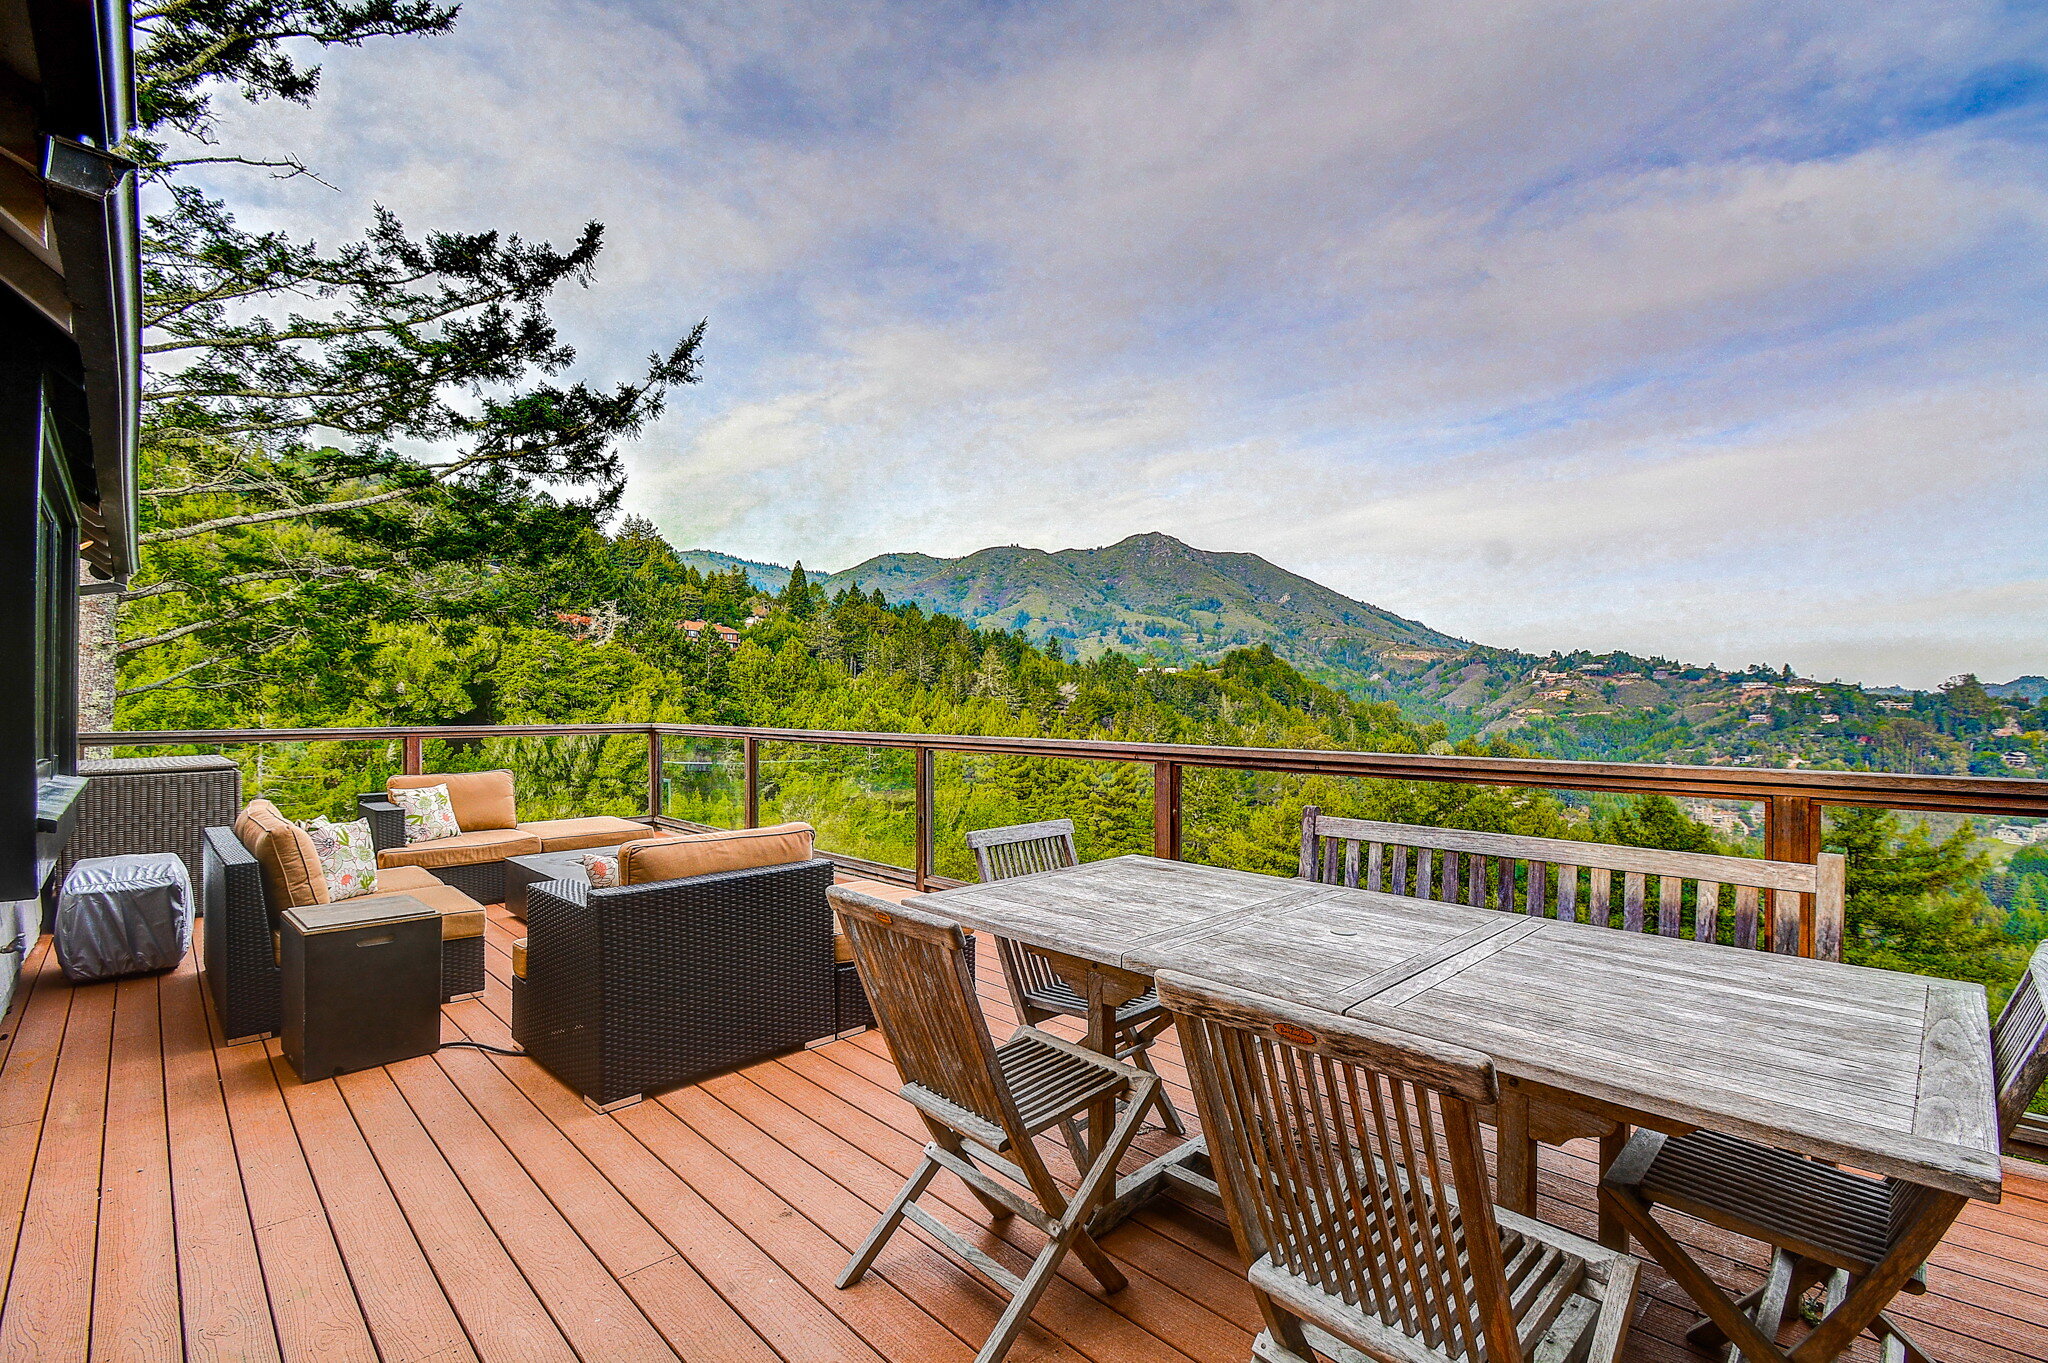 500 Edgewood Avenue-45- Mill Valley Real Estate - Listed by Allie Fornesi Top Mill Valley Realtor.jpg